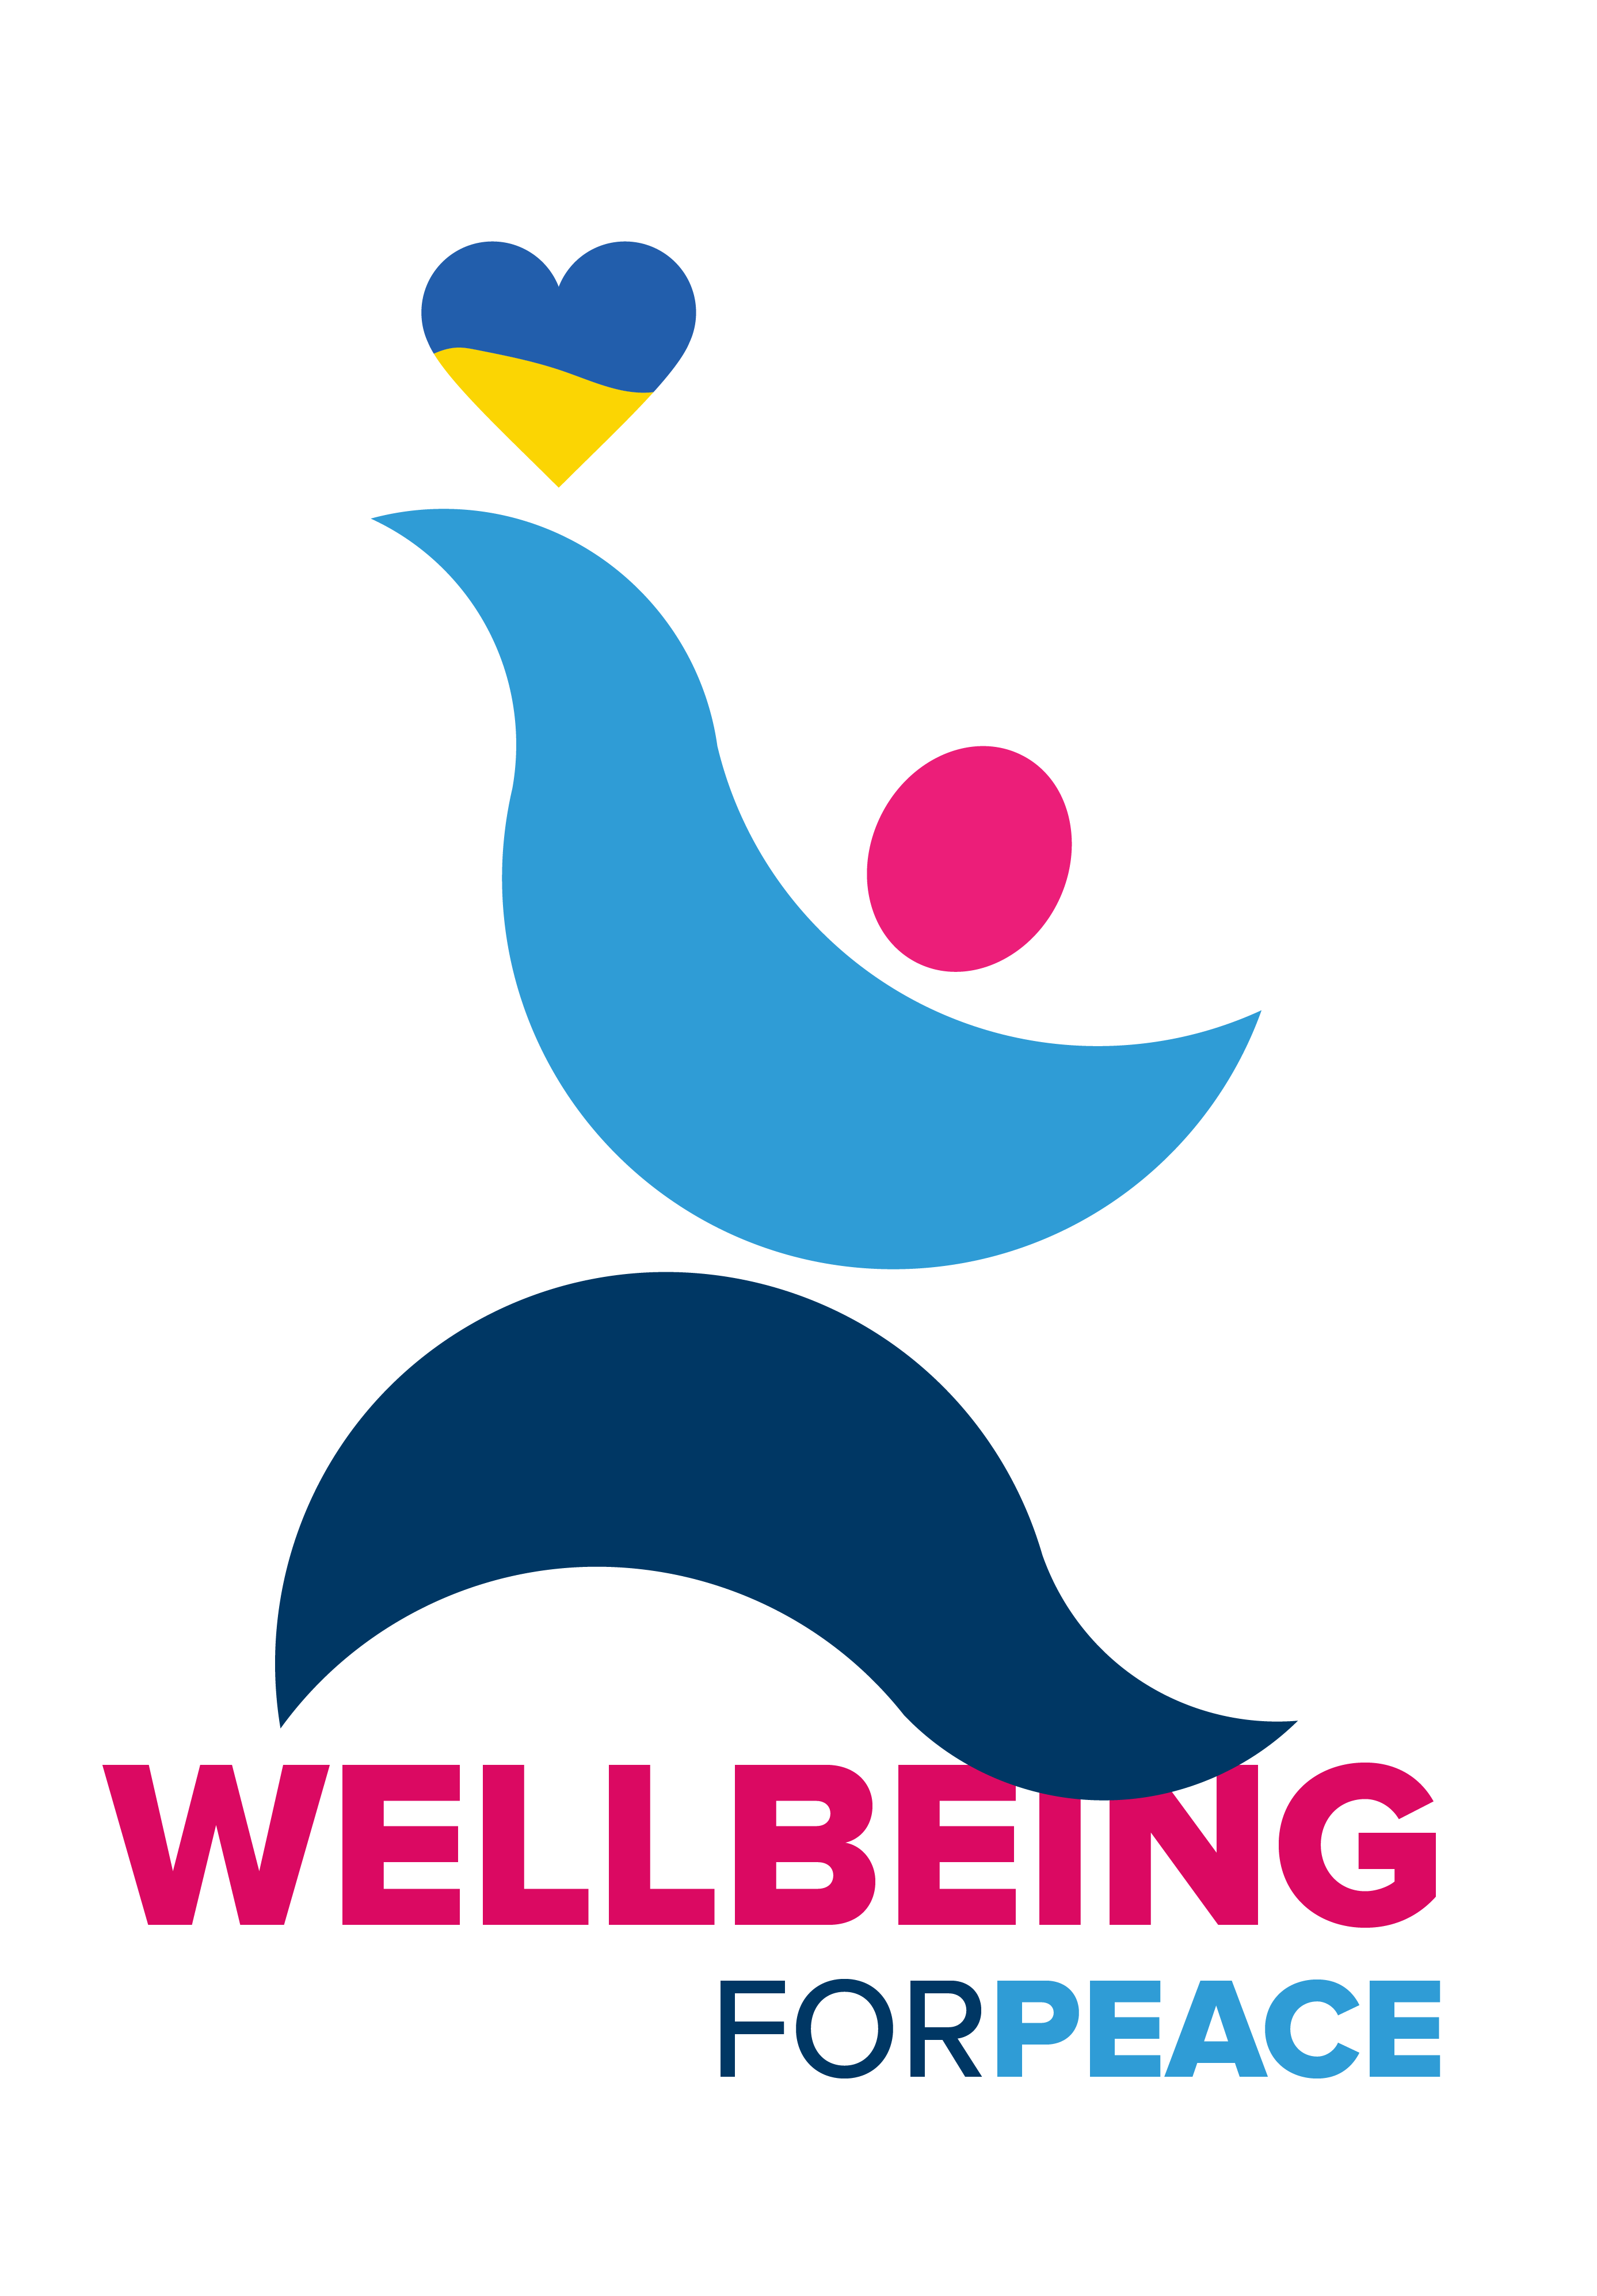 Newfront Sponsors "Wellbeing For Peace" to Raise Funds for Ukraine